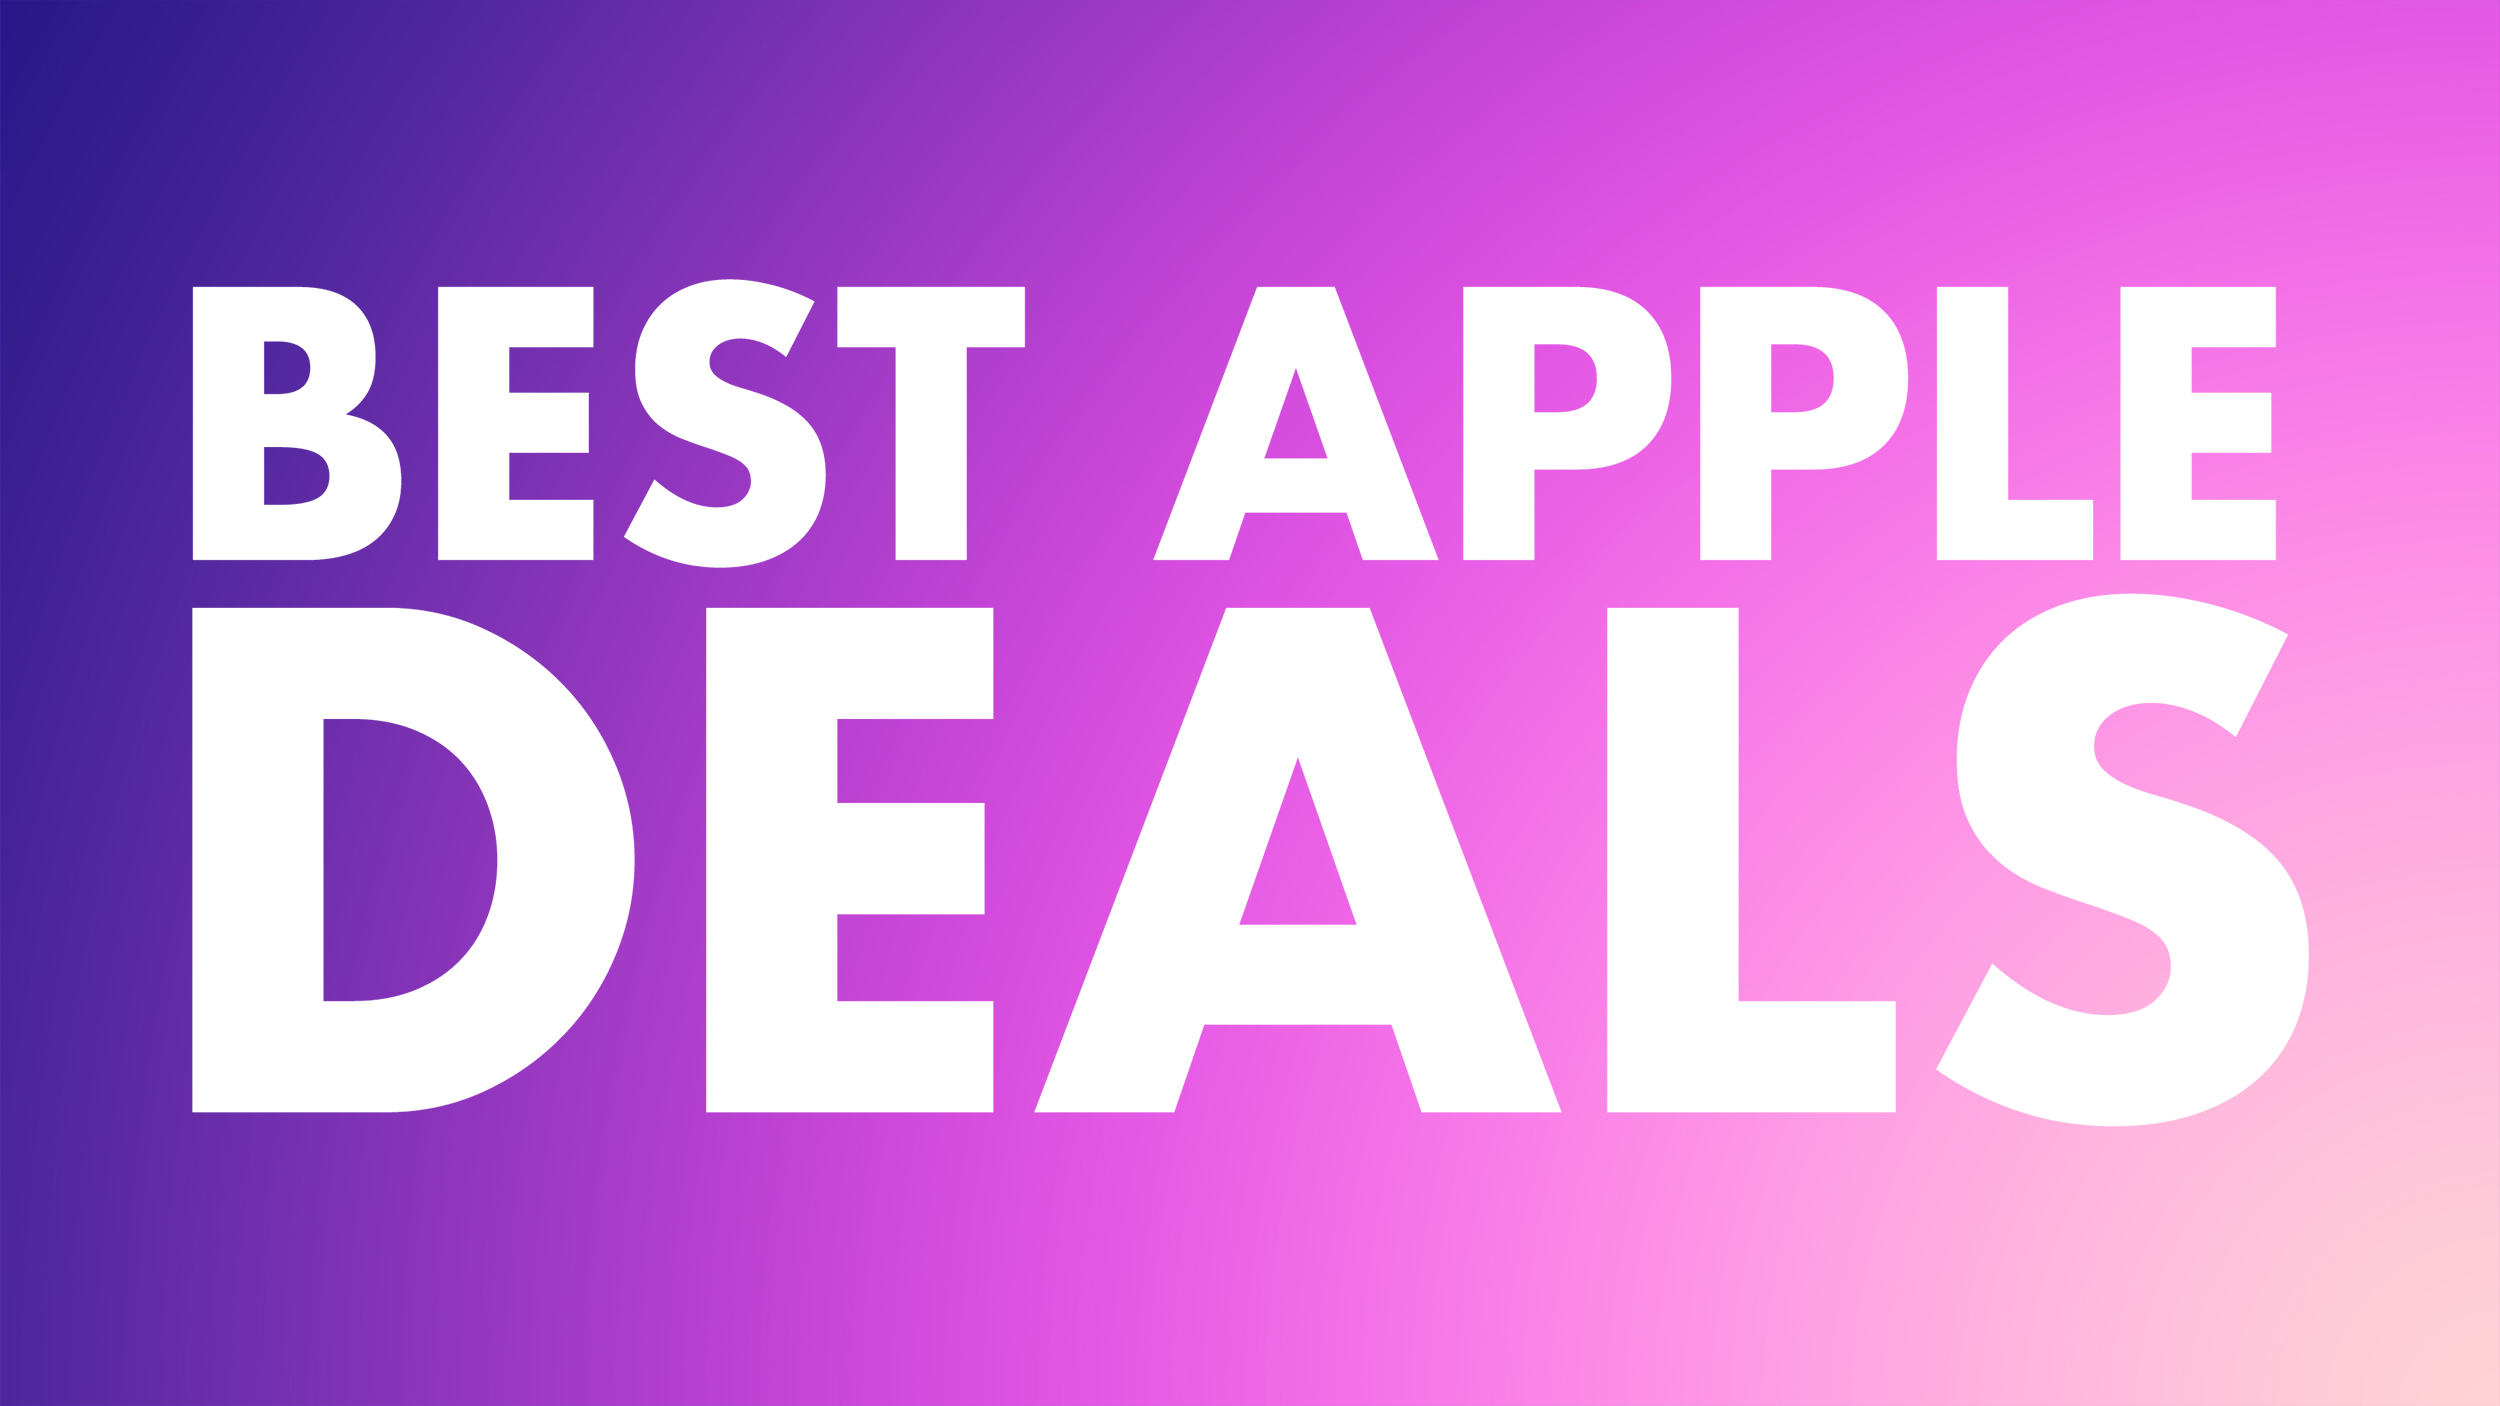 Best Apple Deals of the Week: Samsung’s Smart Monitor M8 Gets Massive $250 Discount, Along With Year’s Best AirPods Prices